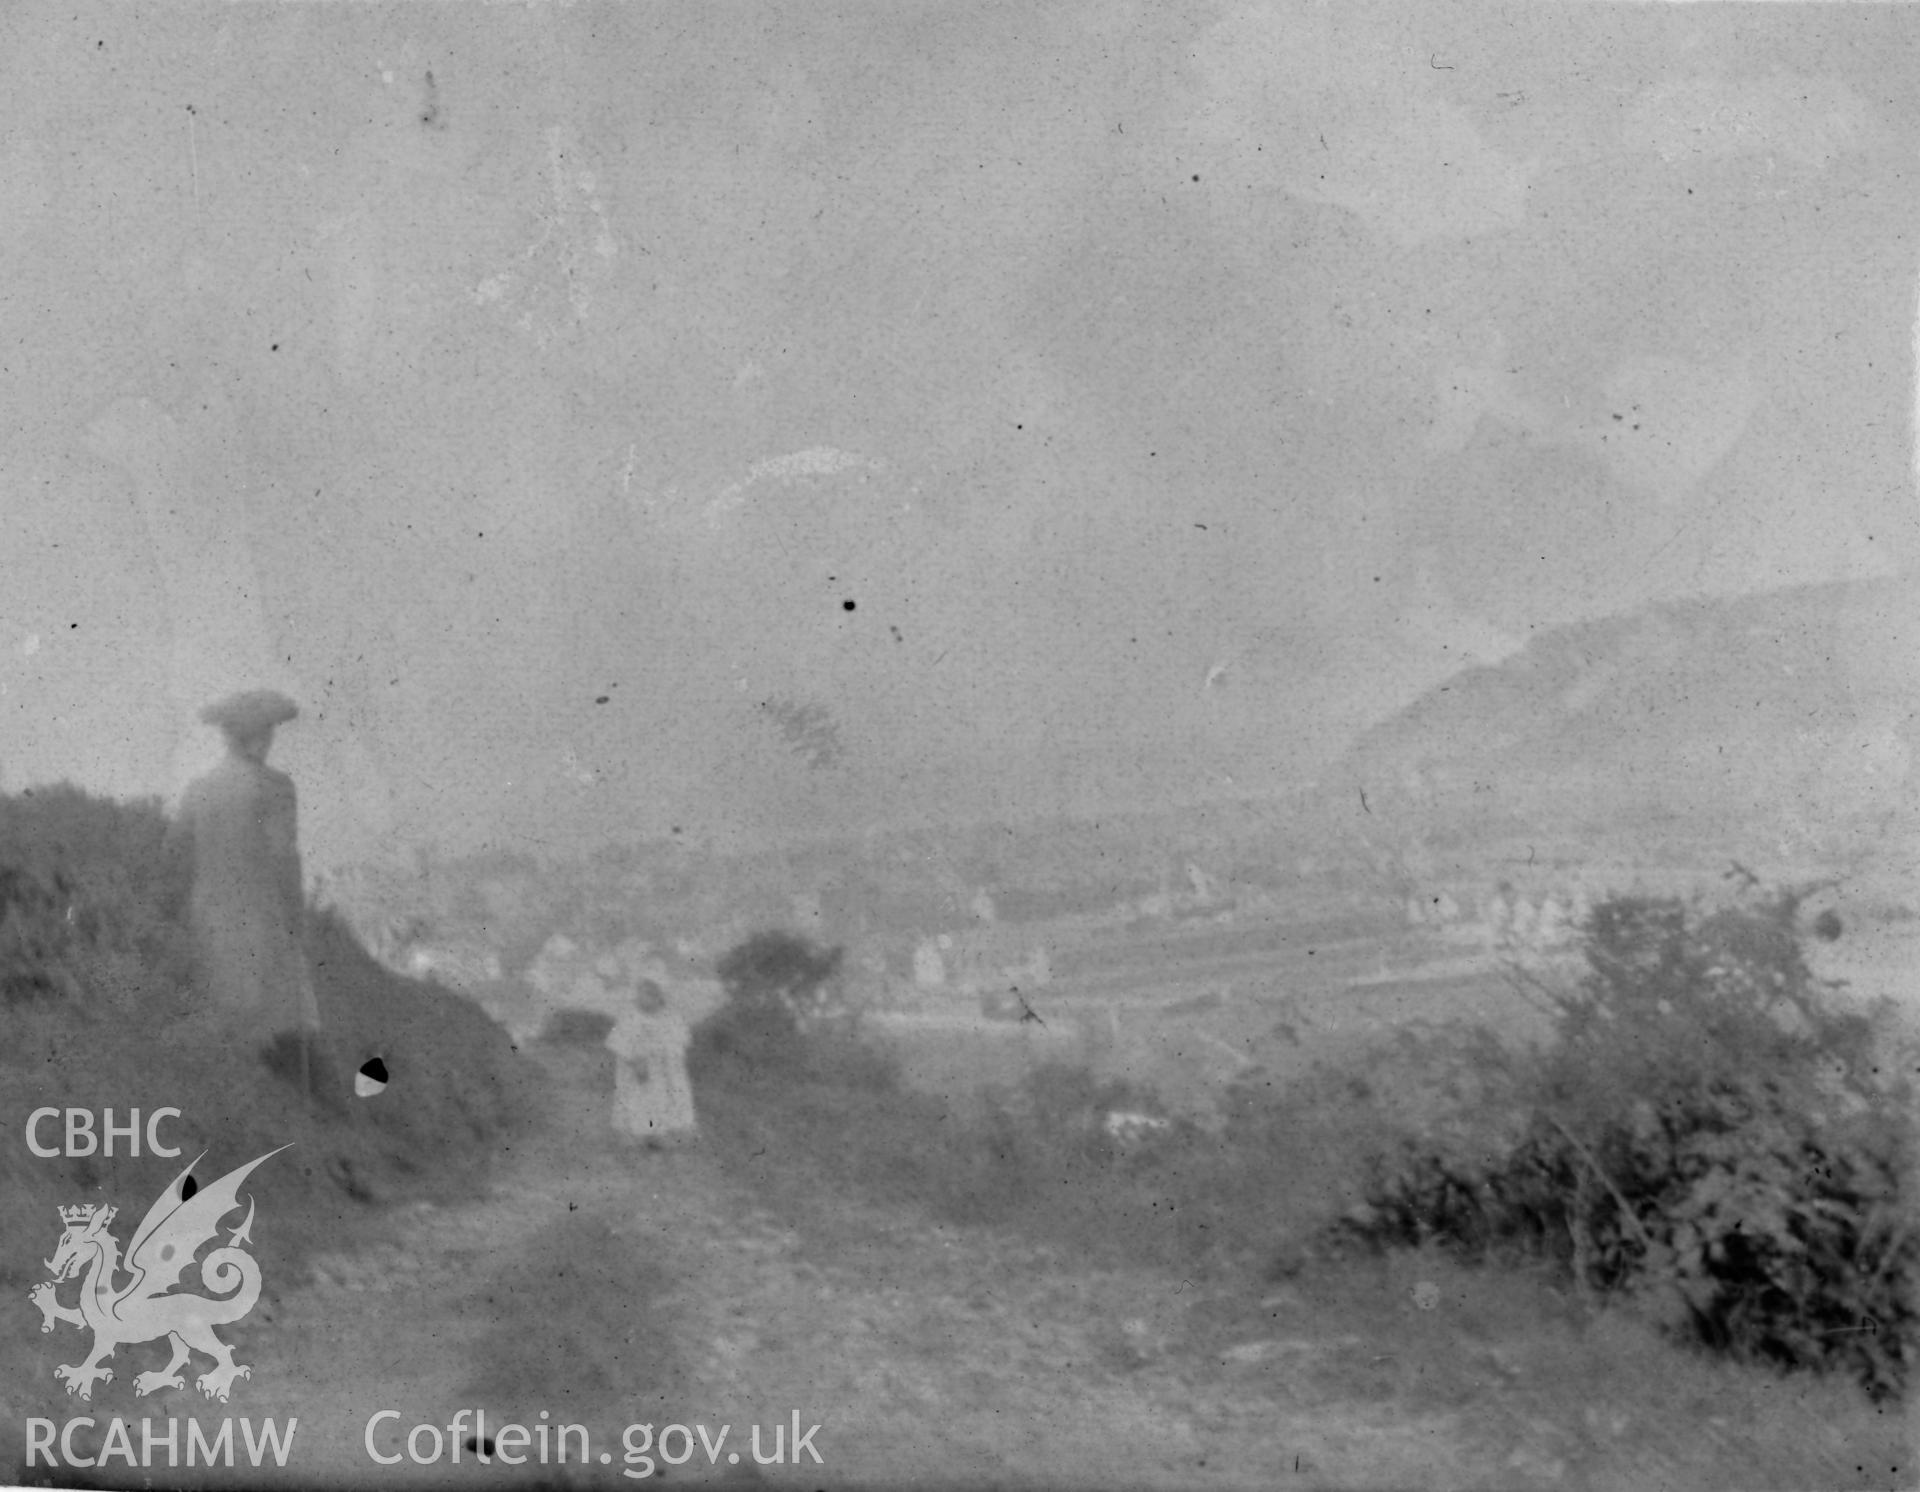 "Way up to Pen Dinas M +H 1904". Photo of two figures. Digitised from a photograph album showing views of Aberystwyth and District, produced by David John Saer, school teacher of Aberystwyth. Loaned for copying by Dr Alan Chamberlain.